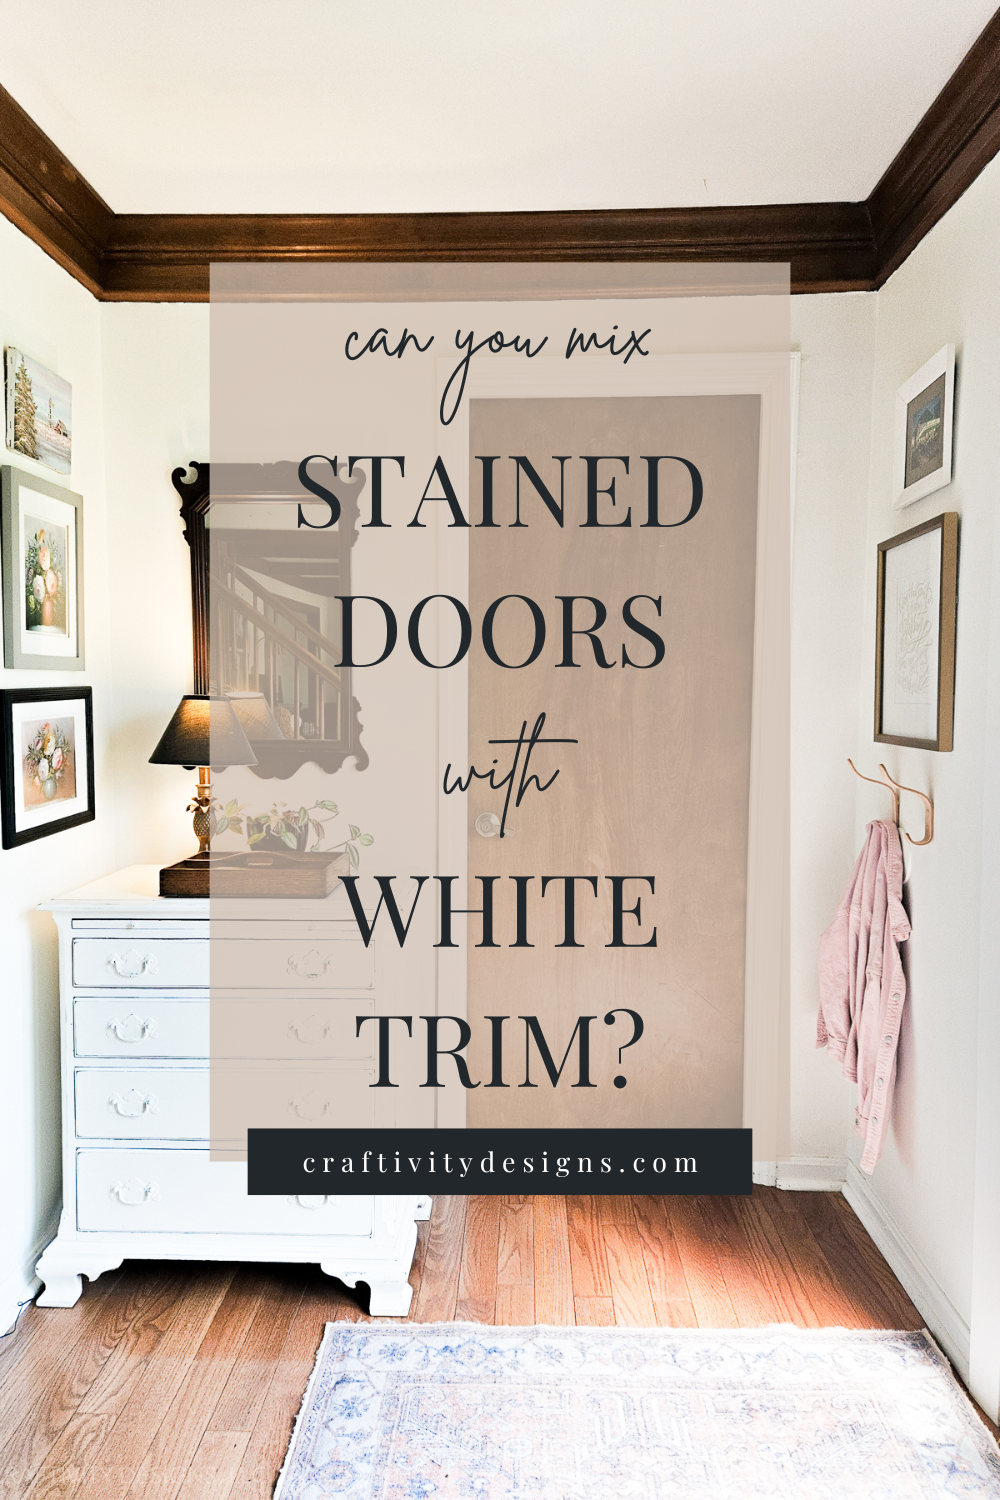 What colour to paint your internal doors and woodwork?